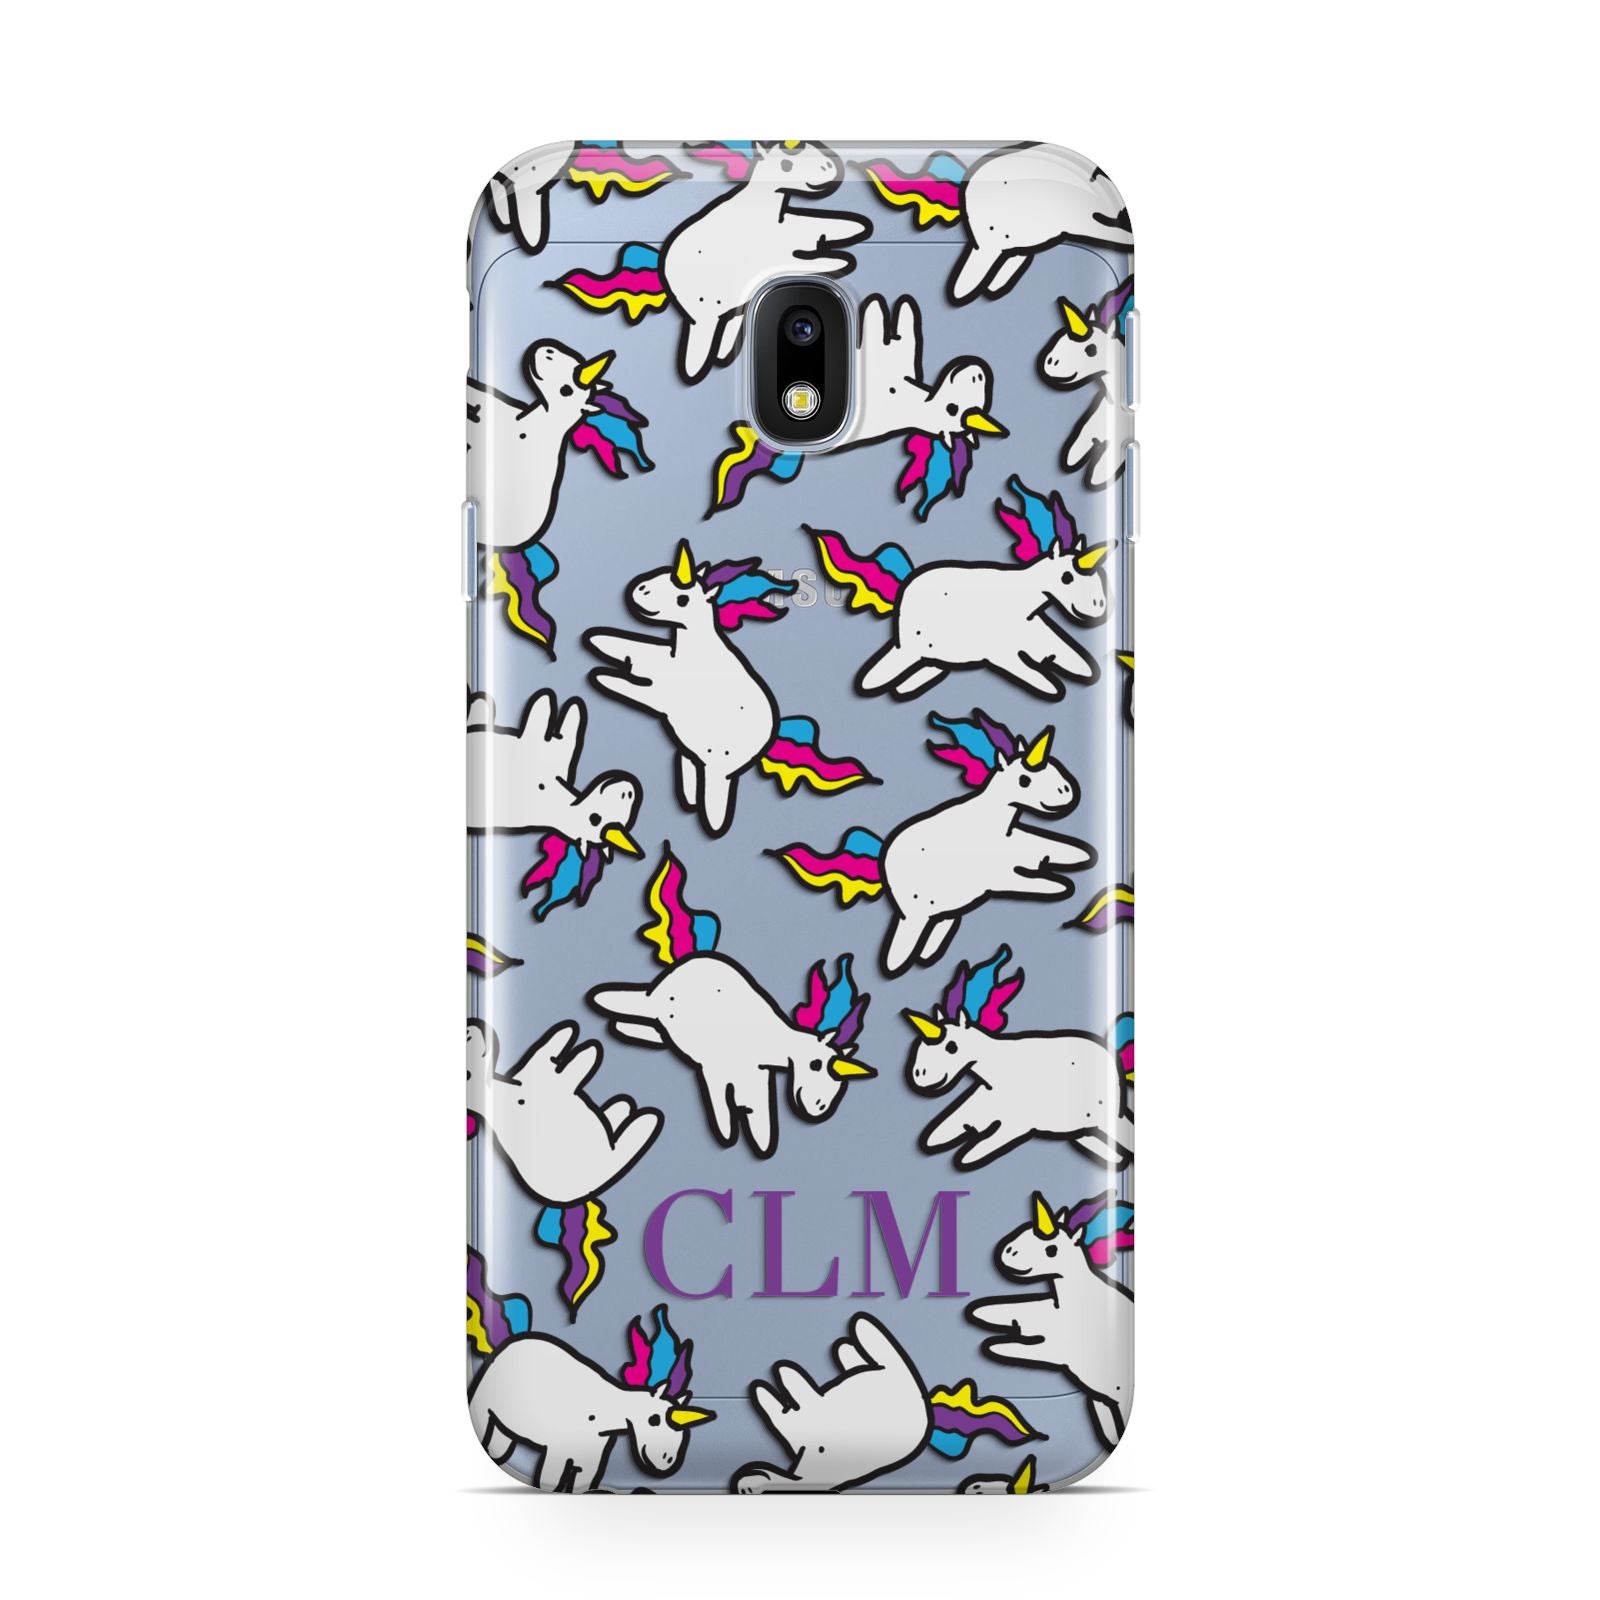 Personalised Unicorn With Initials Samsung Galaxy J3 2017 Case